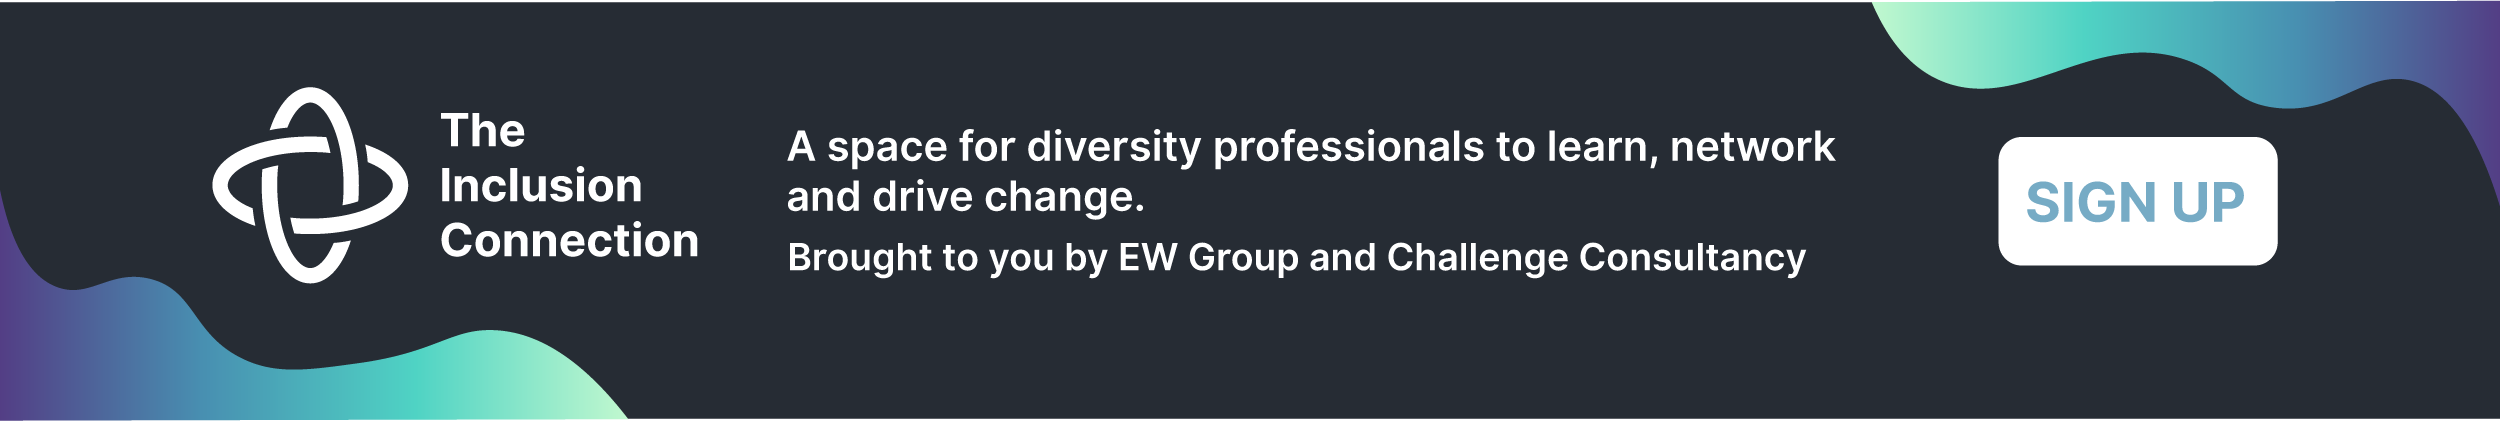 The Inclusion Connection. A space for diversity professionals to learn, network and drive change. Brought to you by EW Group and Challenge Consultancy.